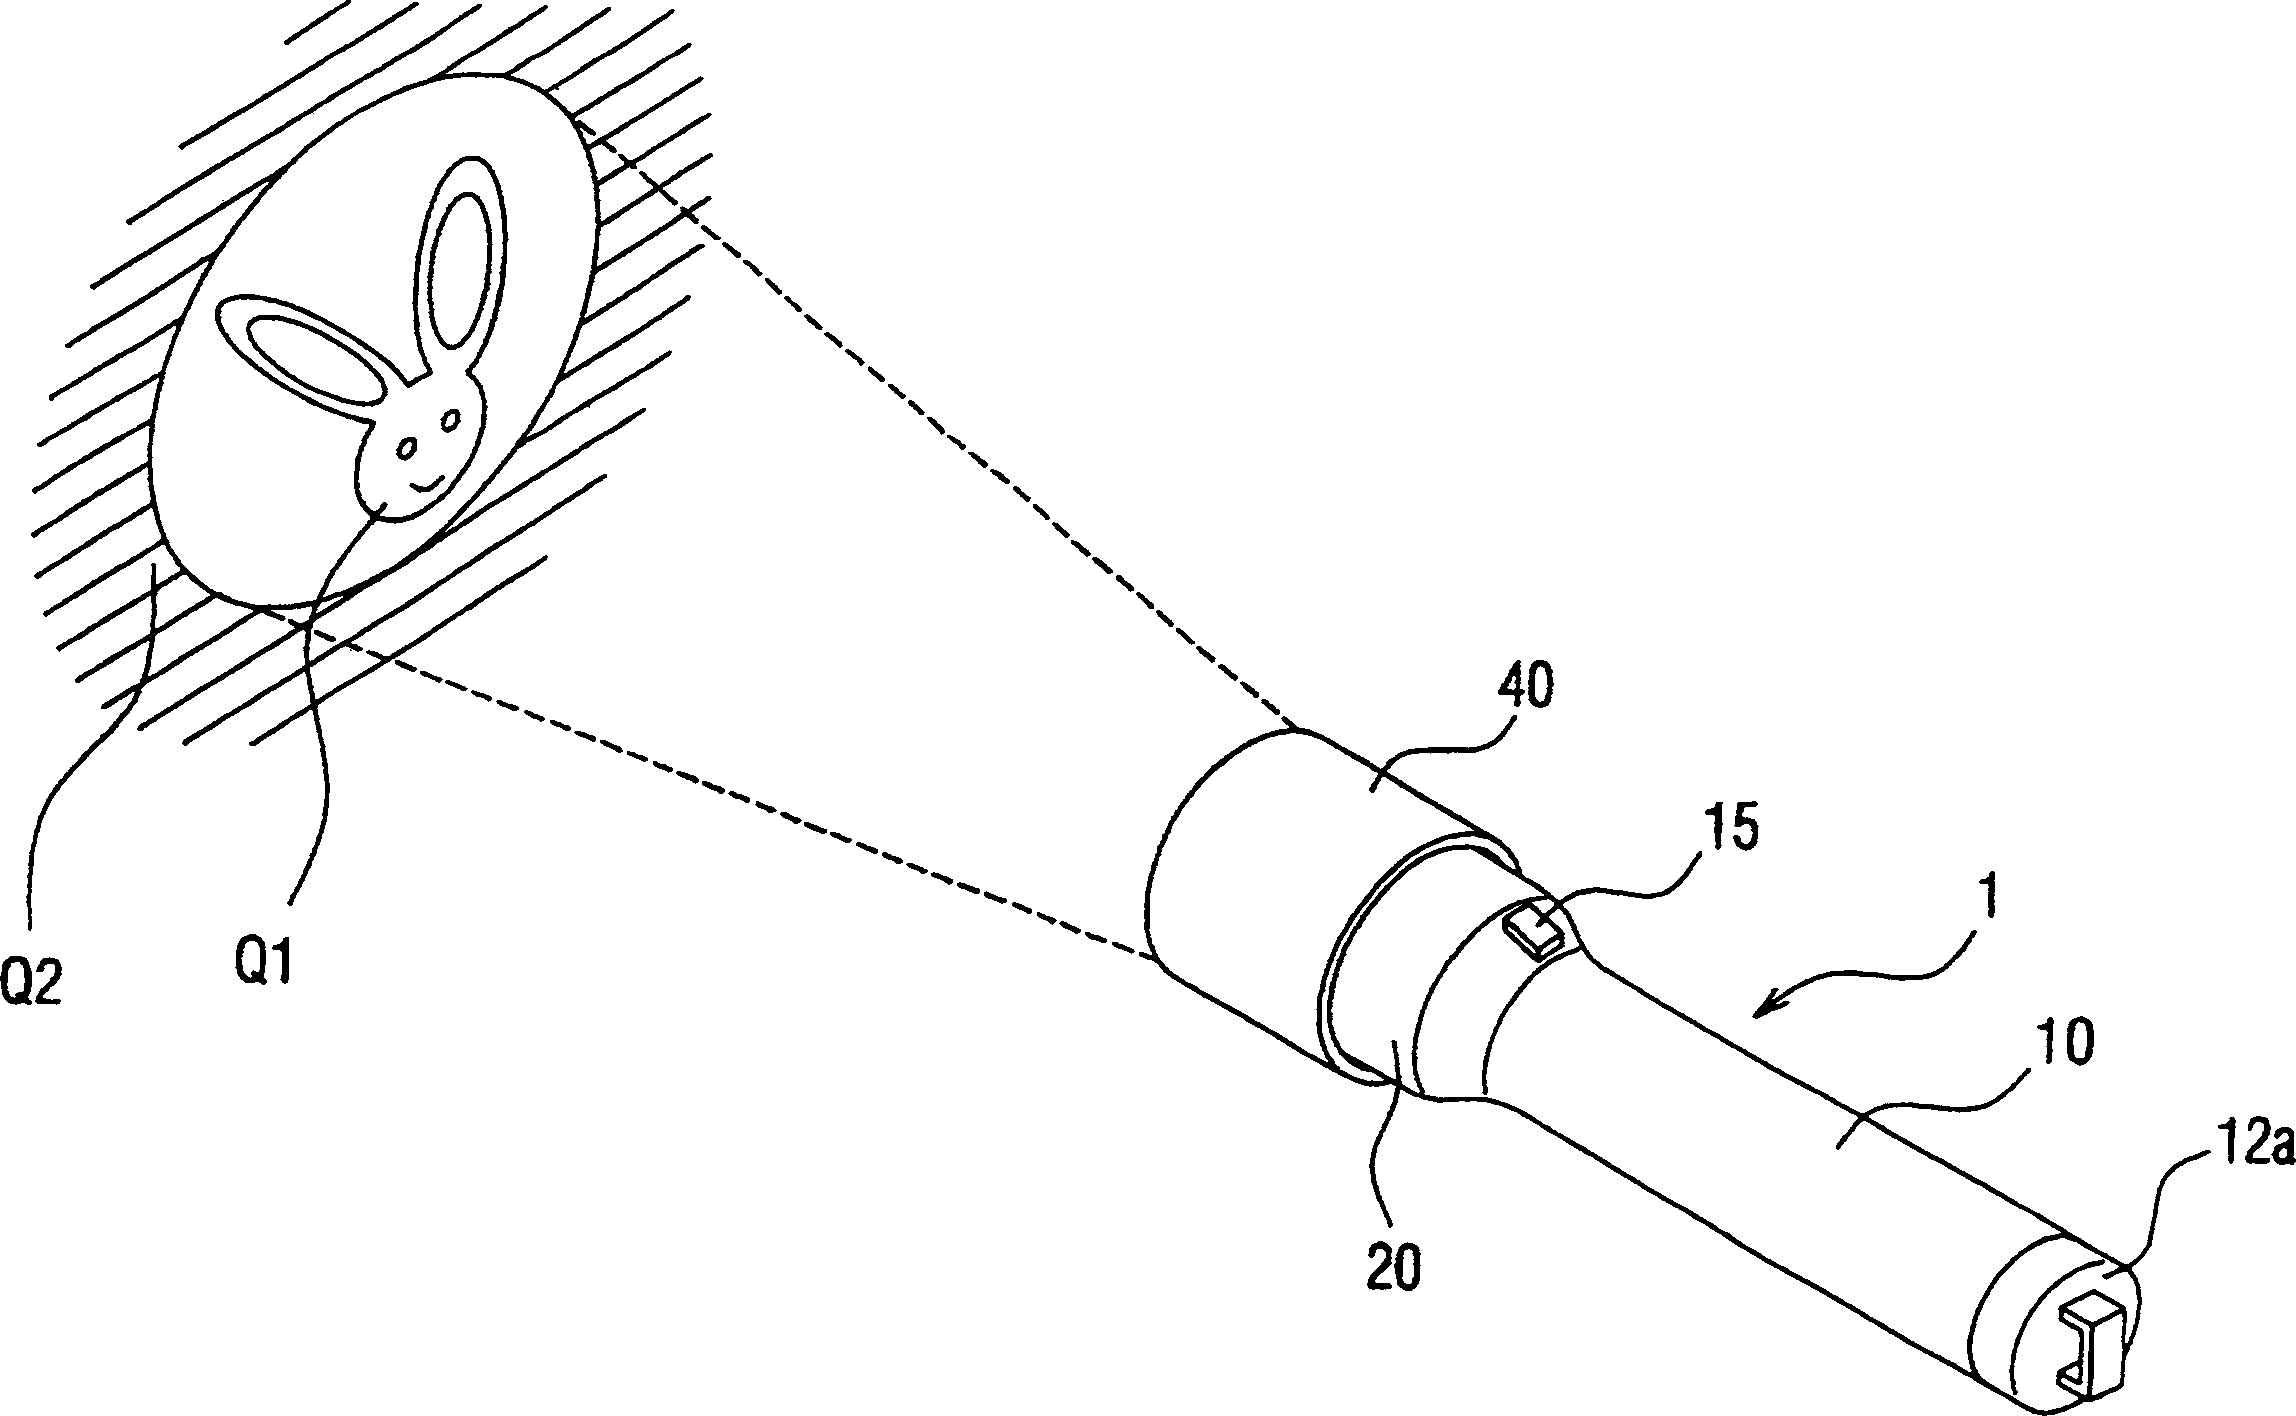 Projective lighting device and film component used therein